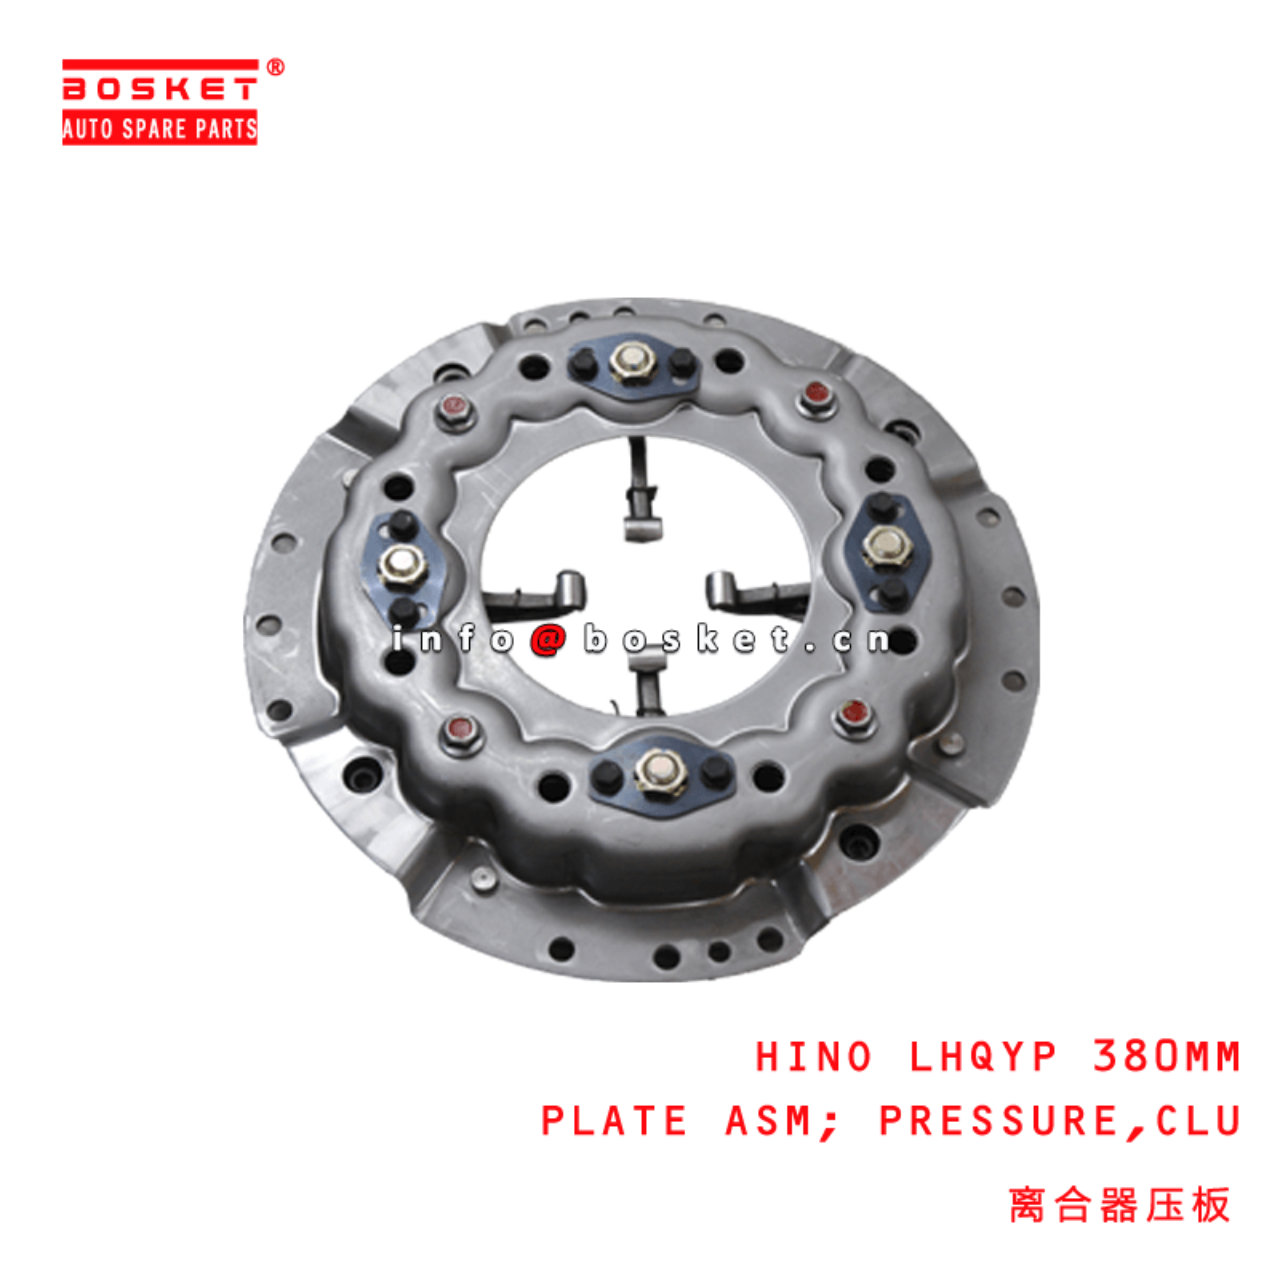 HINO LHQYP 380MM Clutch Pressure Plate Assembly Suitable For HINO 